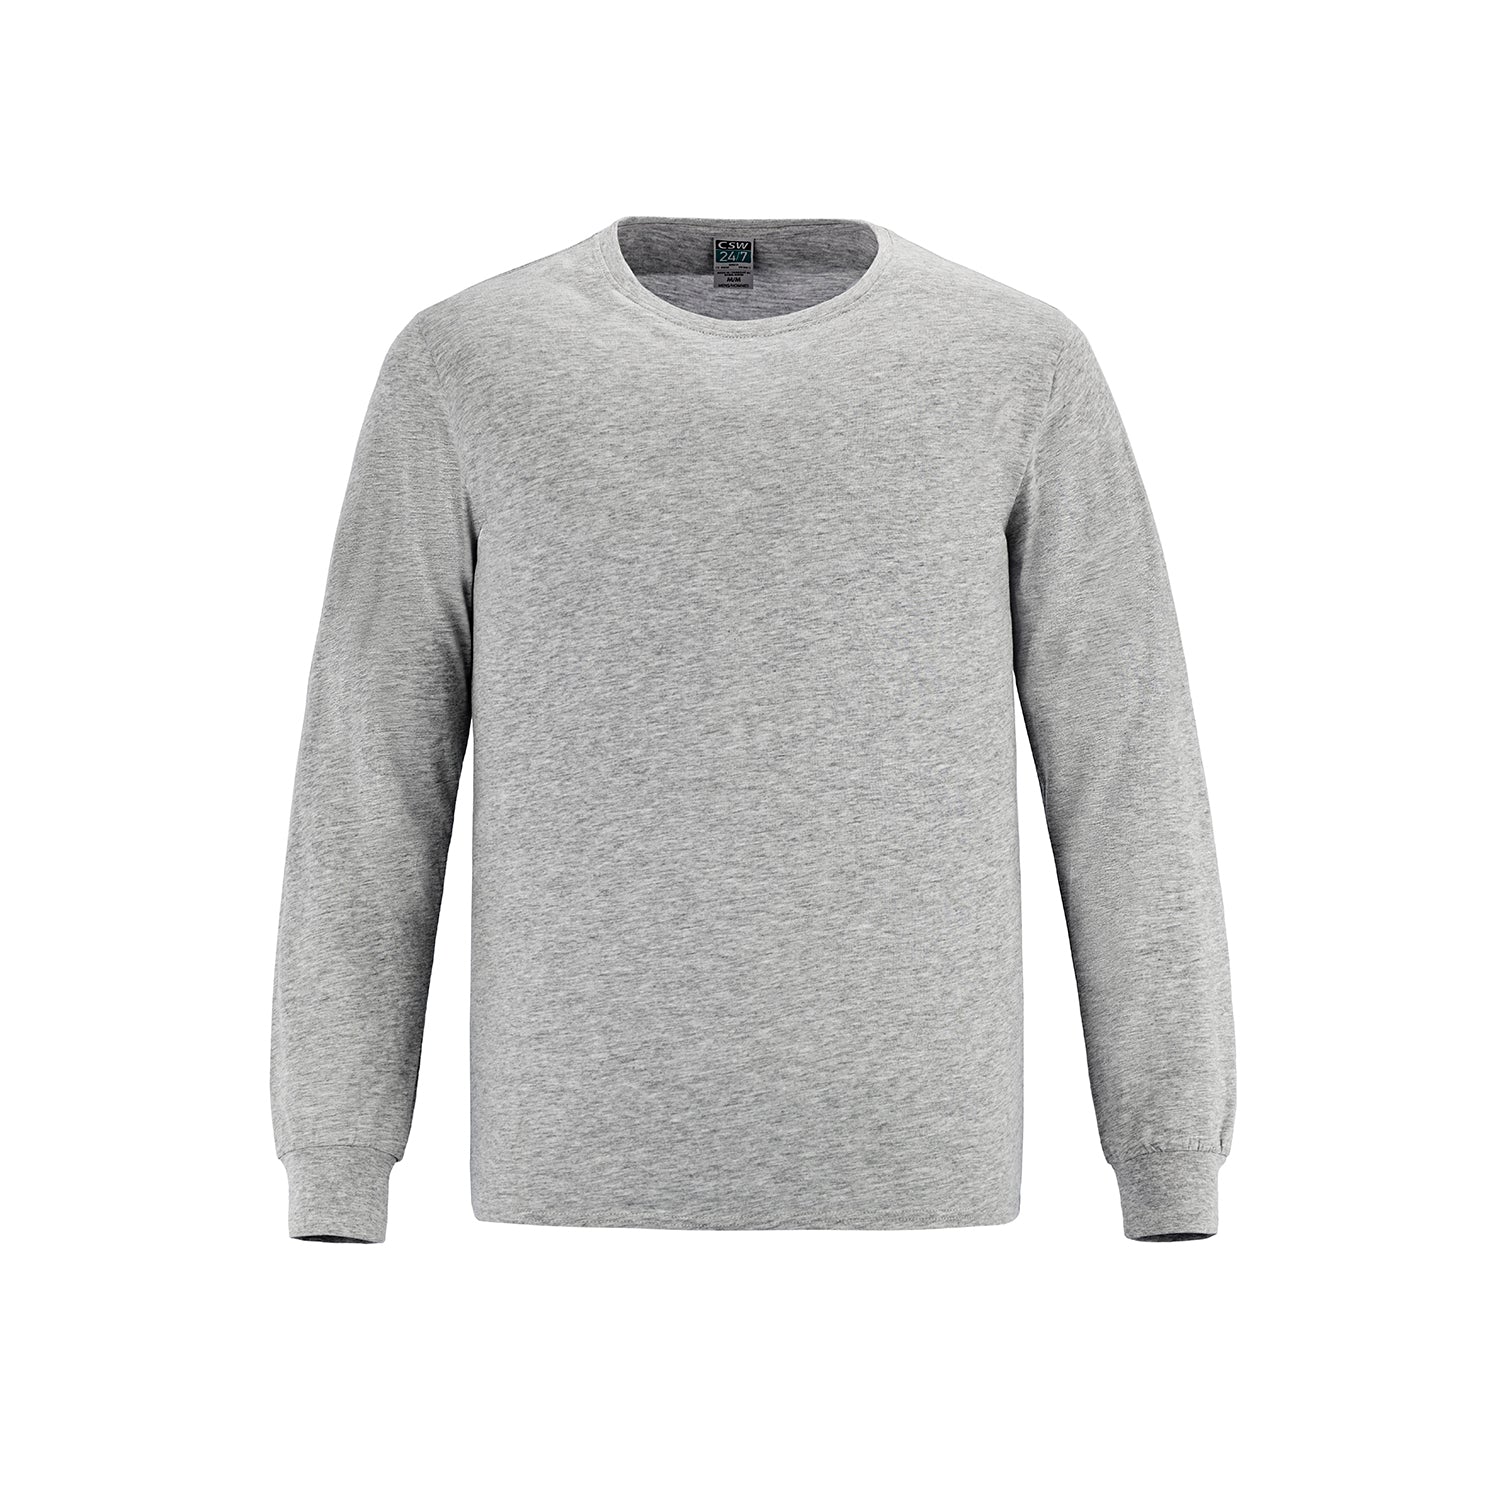 S5615Y - Breeze - Youth Long Sleeve Crewneck Ring Spun Combed